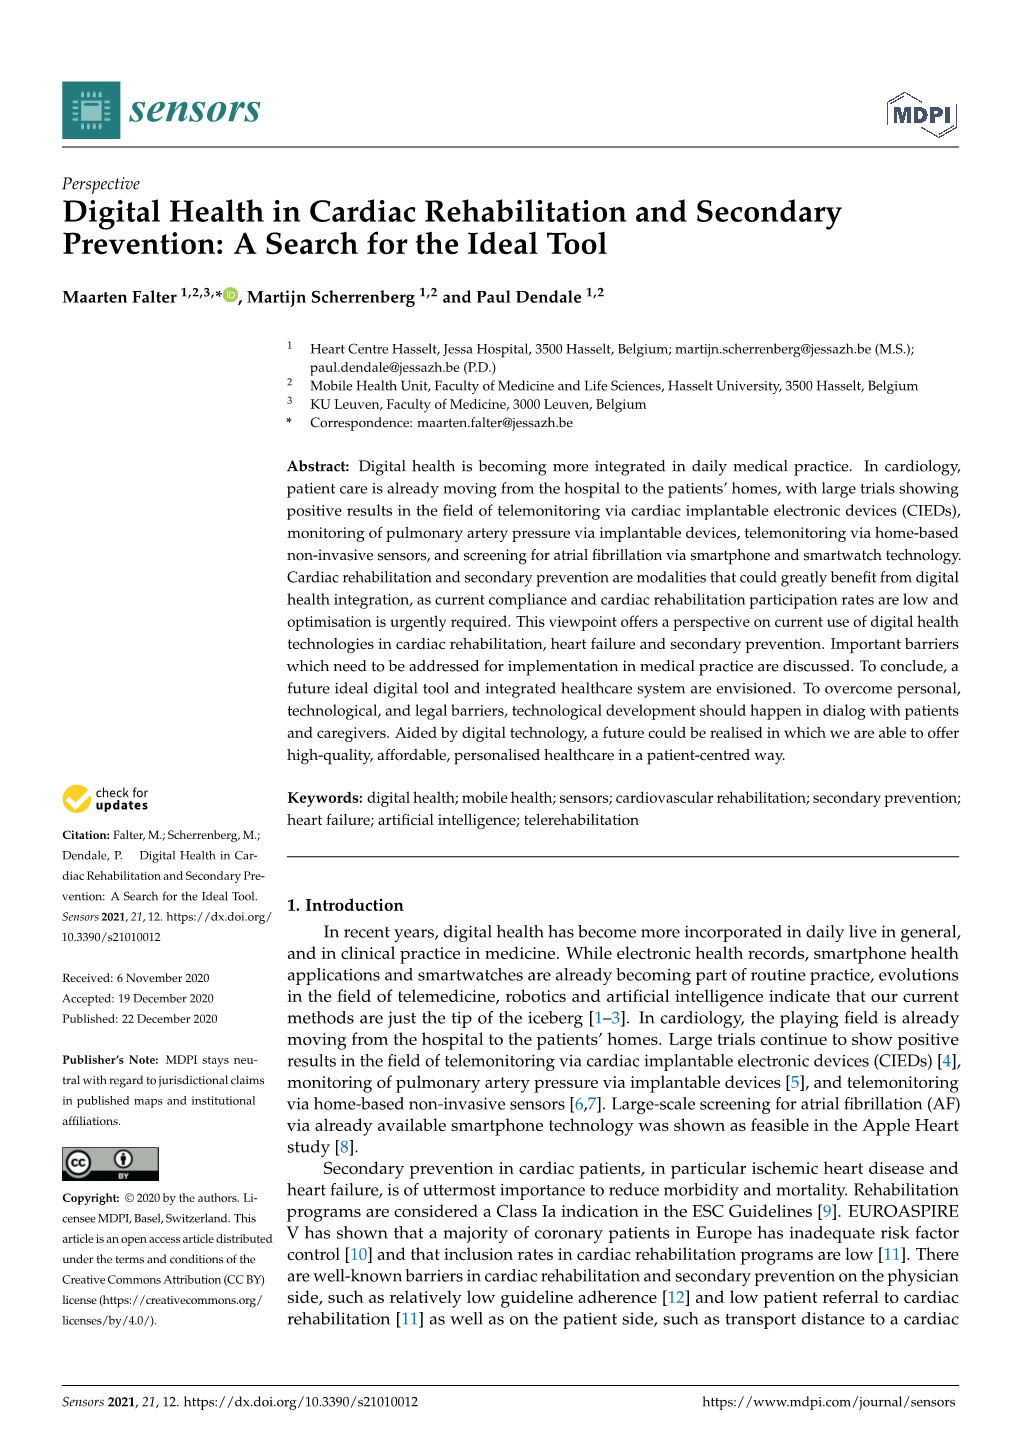 Digital Health in Cardiac Rehabilitation and Secondary Prevention: a Search for the Ideal Tool